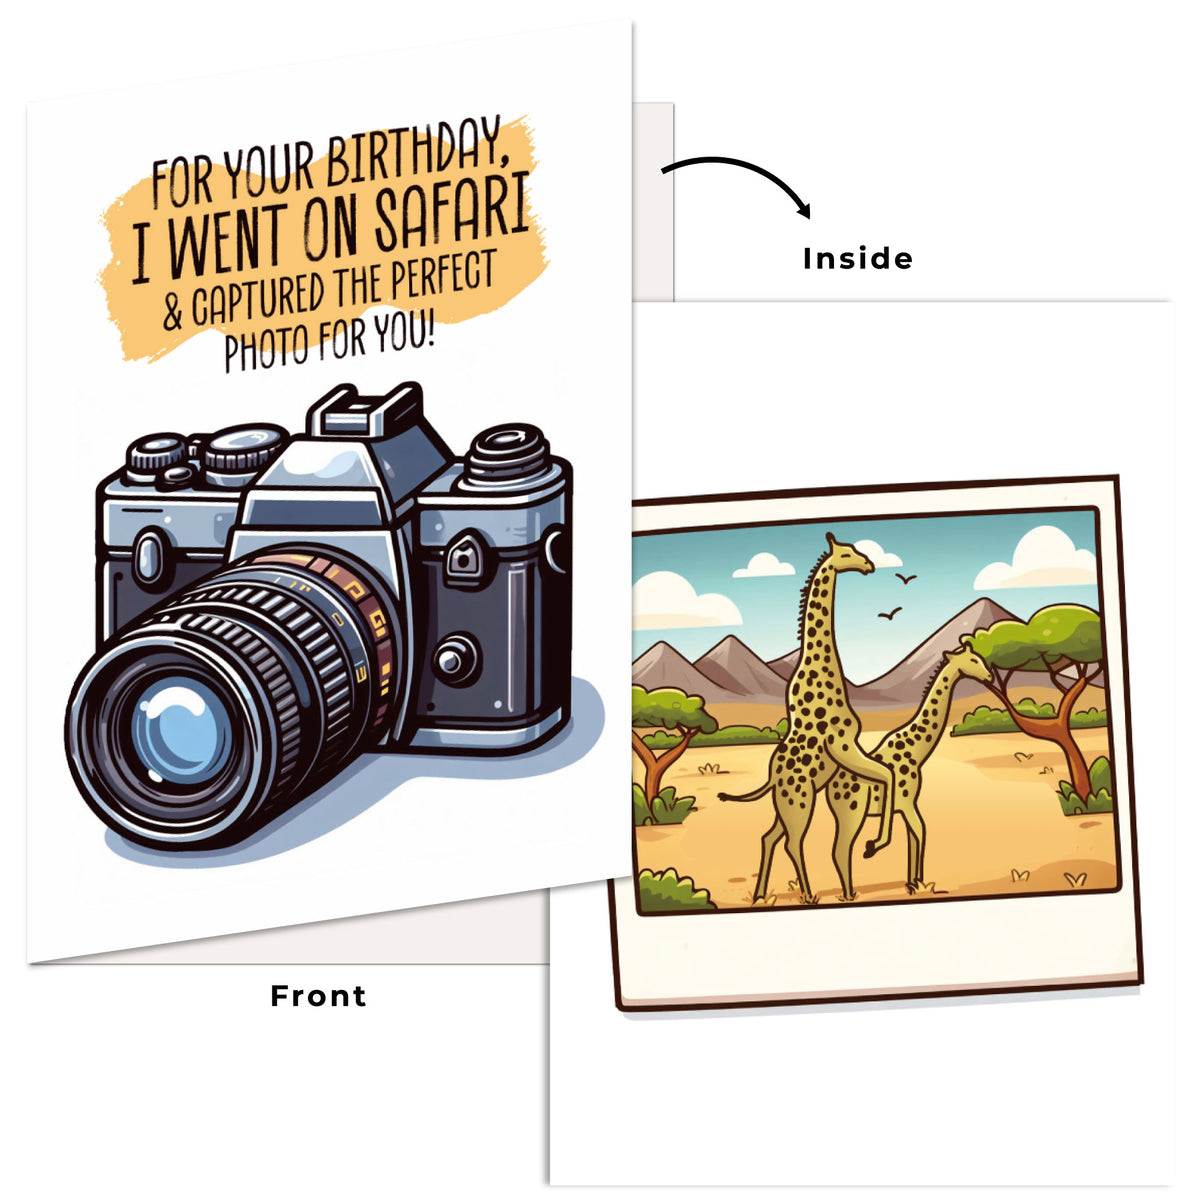 Funny Birthday Card Hilarious Assorted Cards For Celebrating With Envelopes